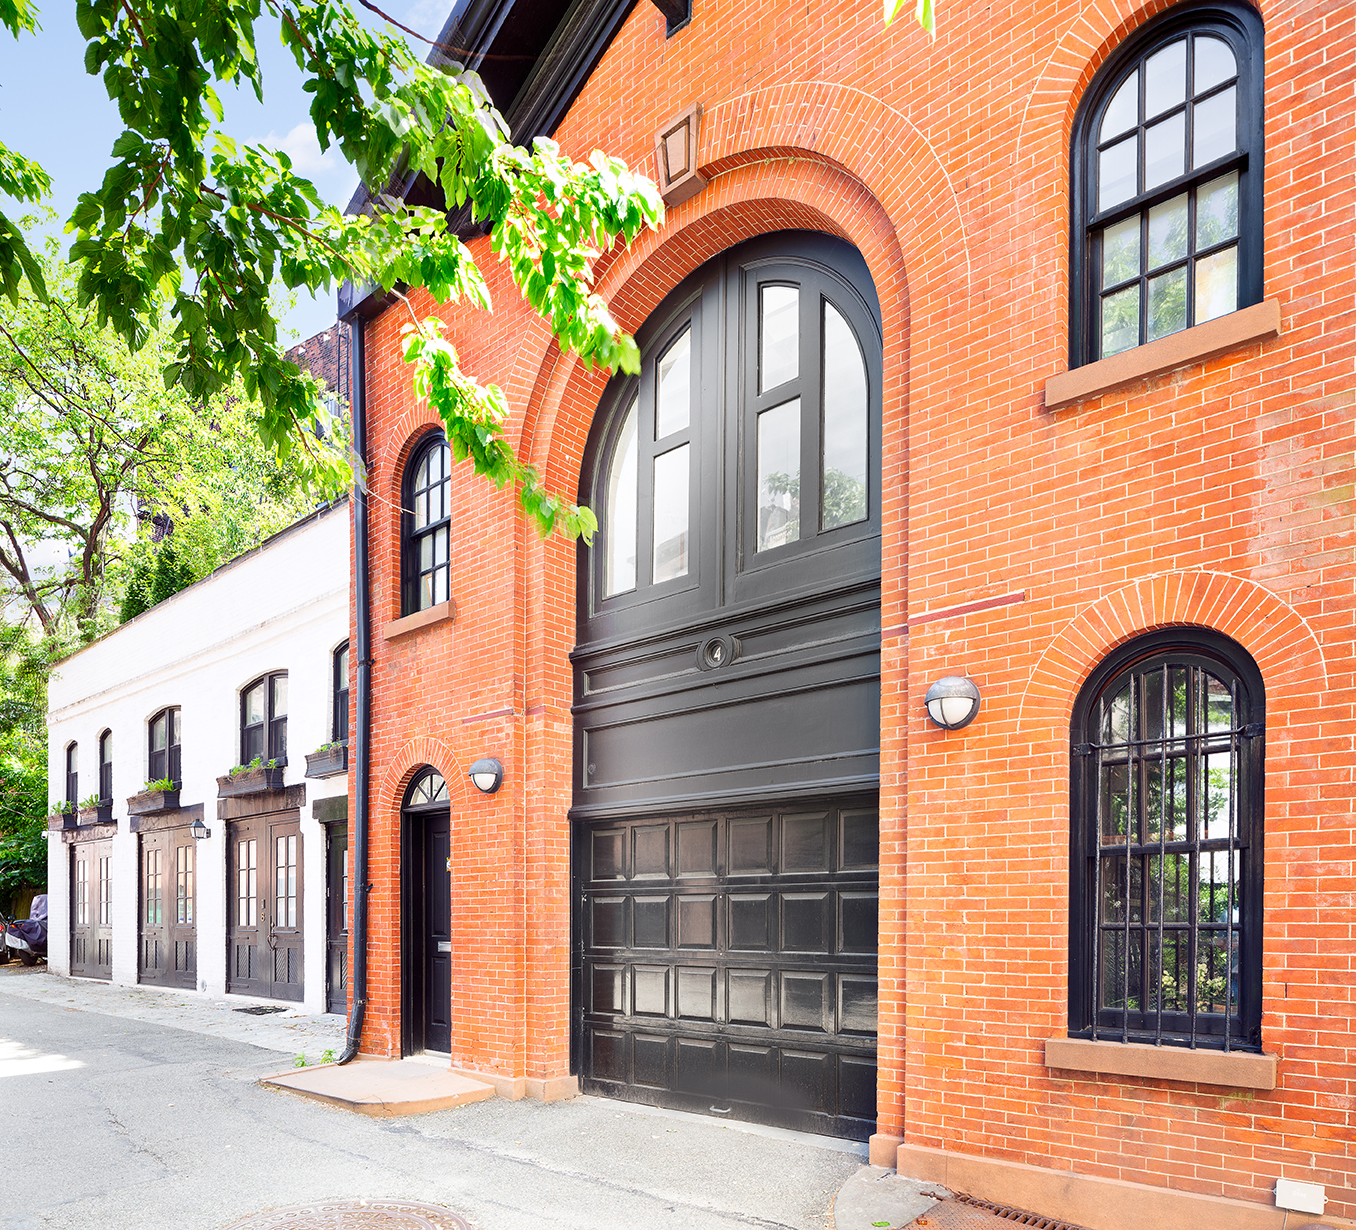 On a private mews in Brooklyn Heights, this creatively restored carriage house is asking $5.5M